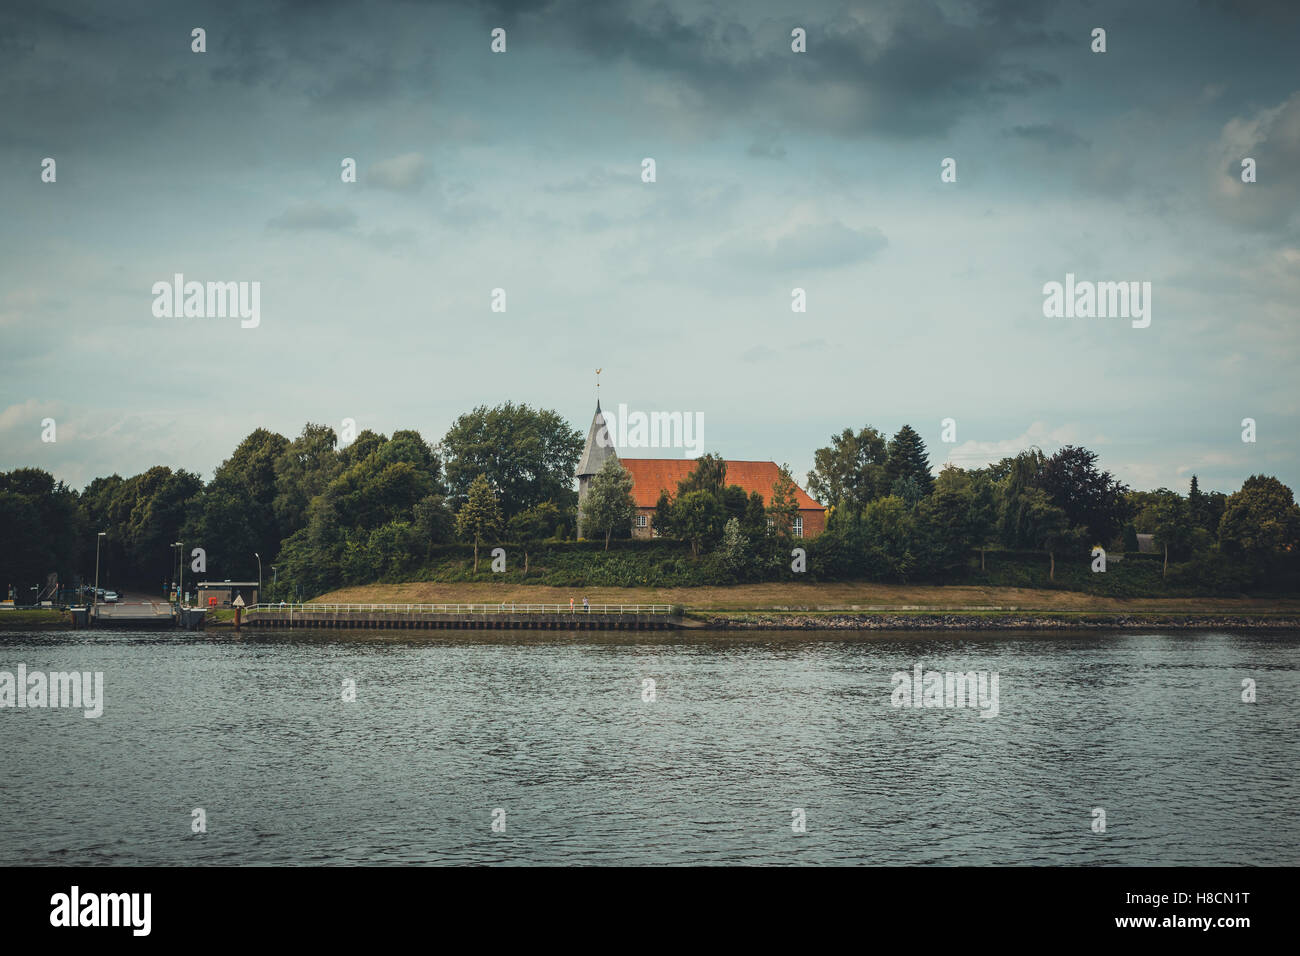 Ostsee canal Stock Photo